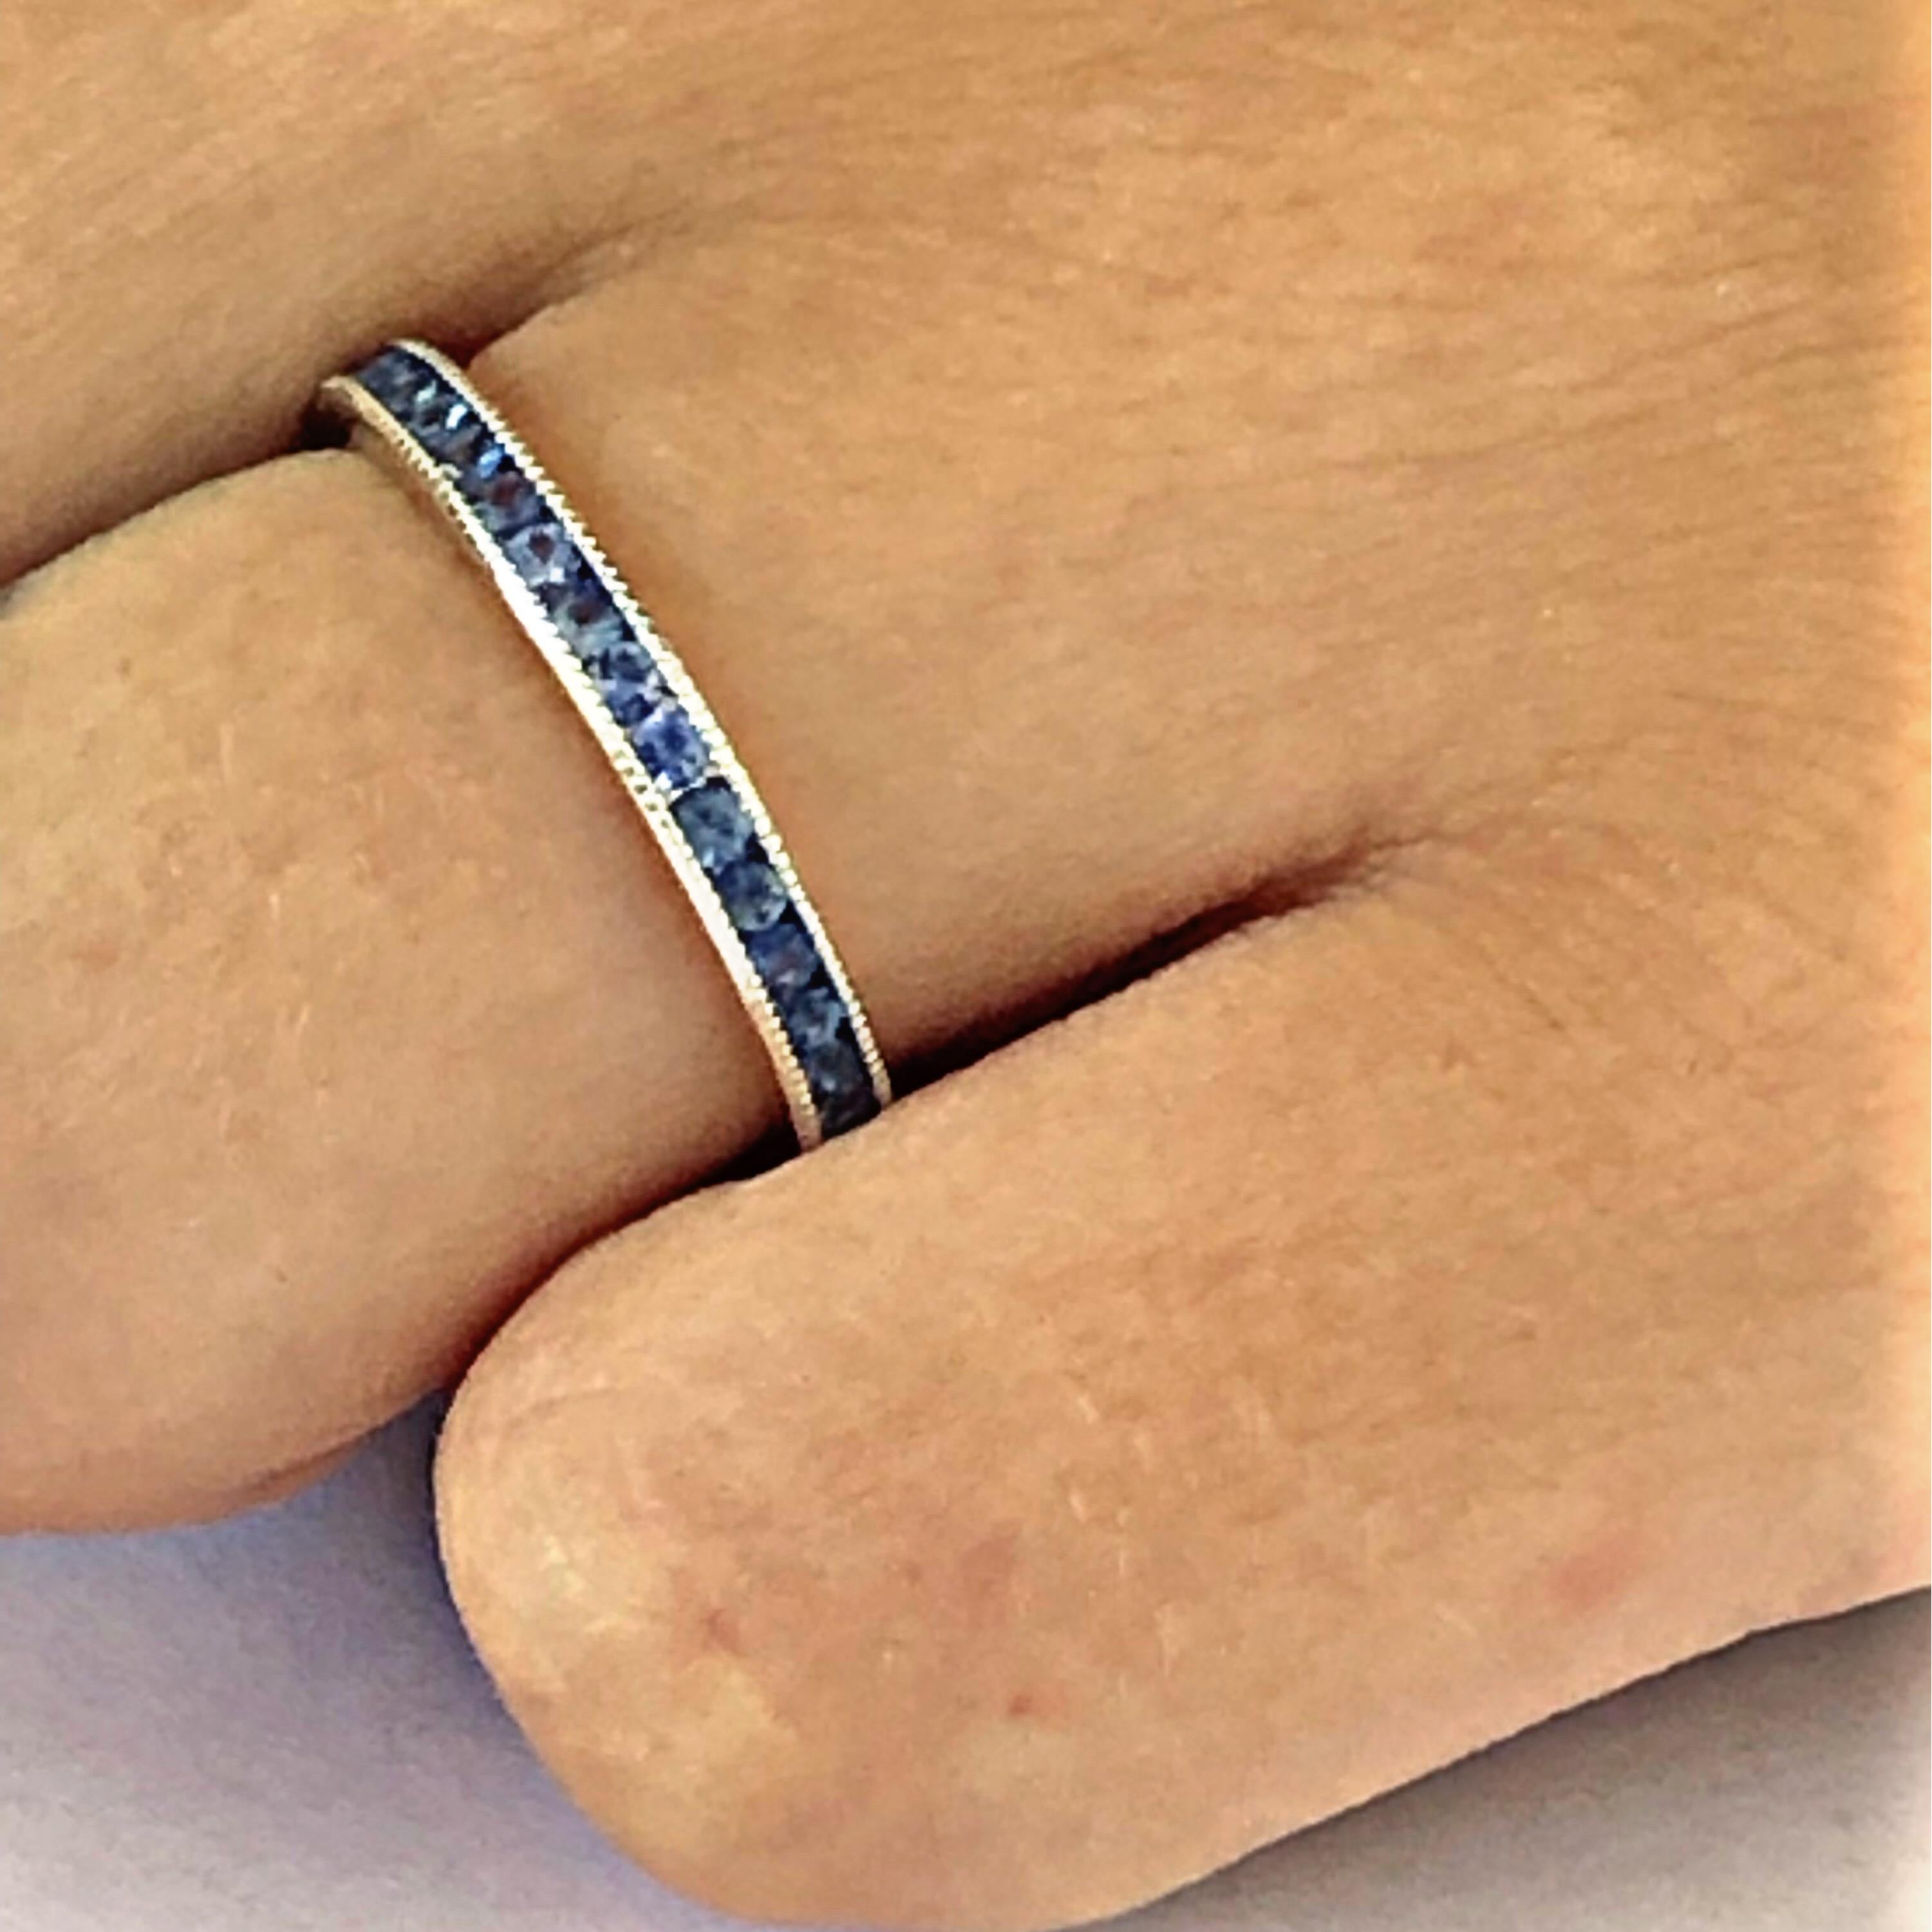 Platinum channel set round diamond cut sapphires eternity stacking or anniversary band 
Sapphire weighing 1.30 carat 
Millgrain edge
New ring 
Our team of graduate gemologists carefully hand-select every diamond and sapphire. 
Ring size 6 In